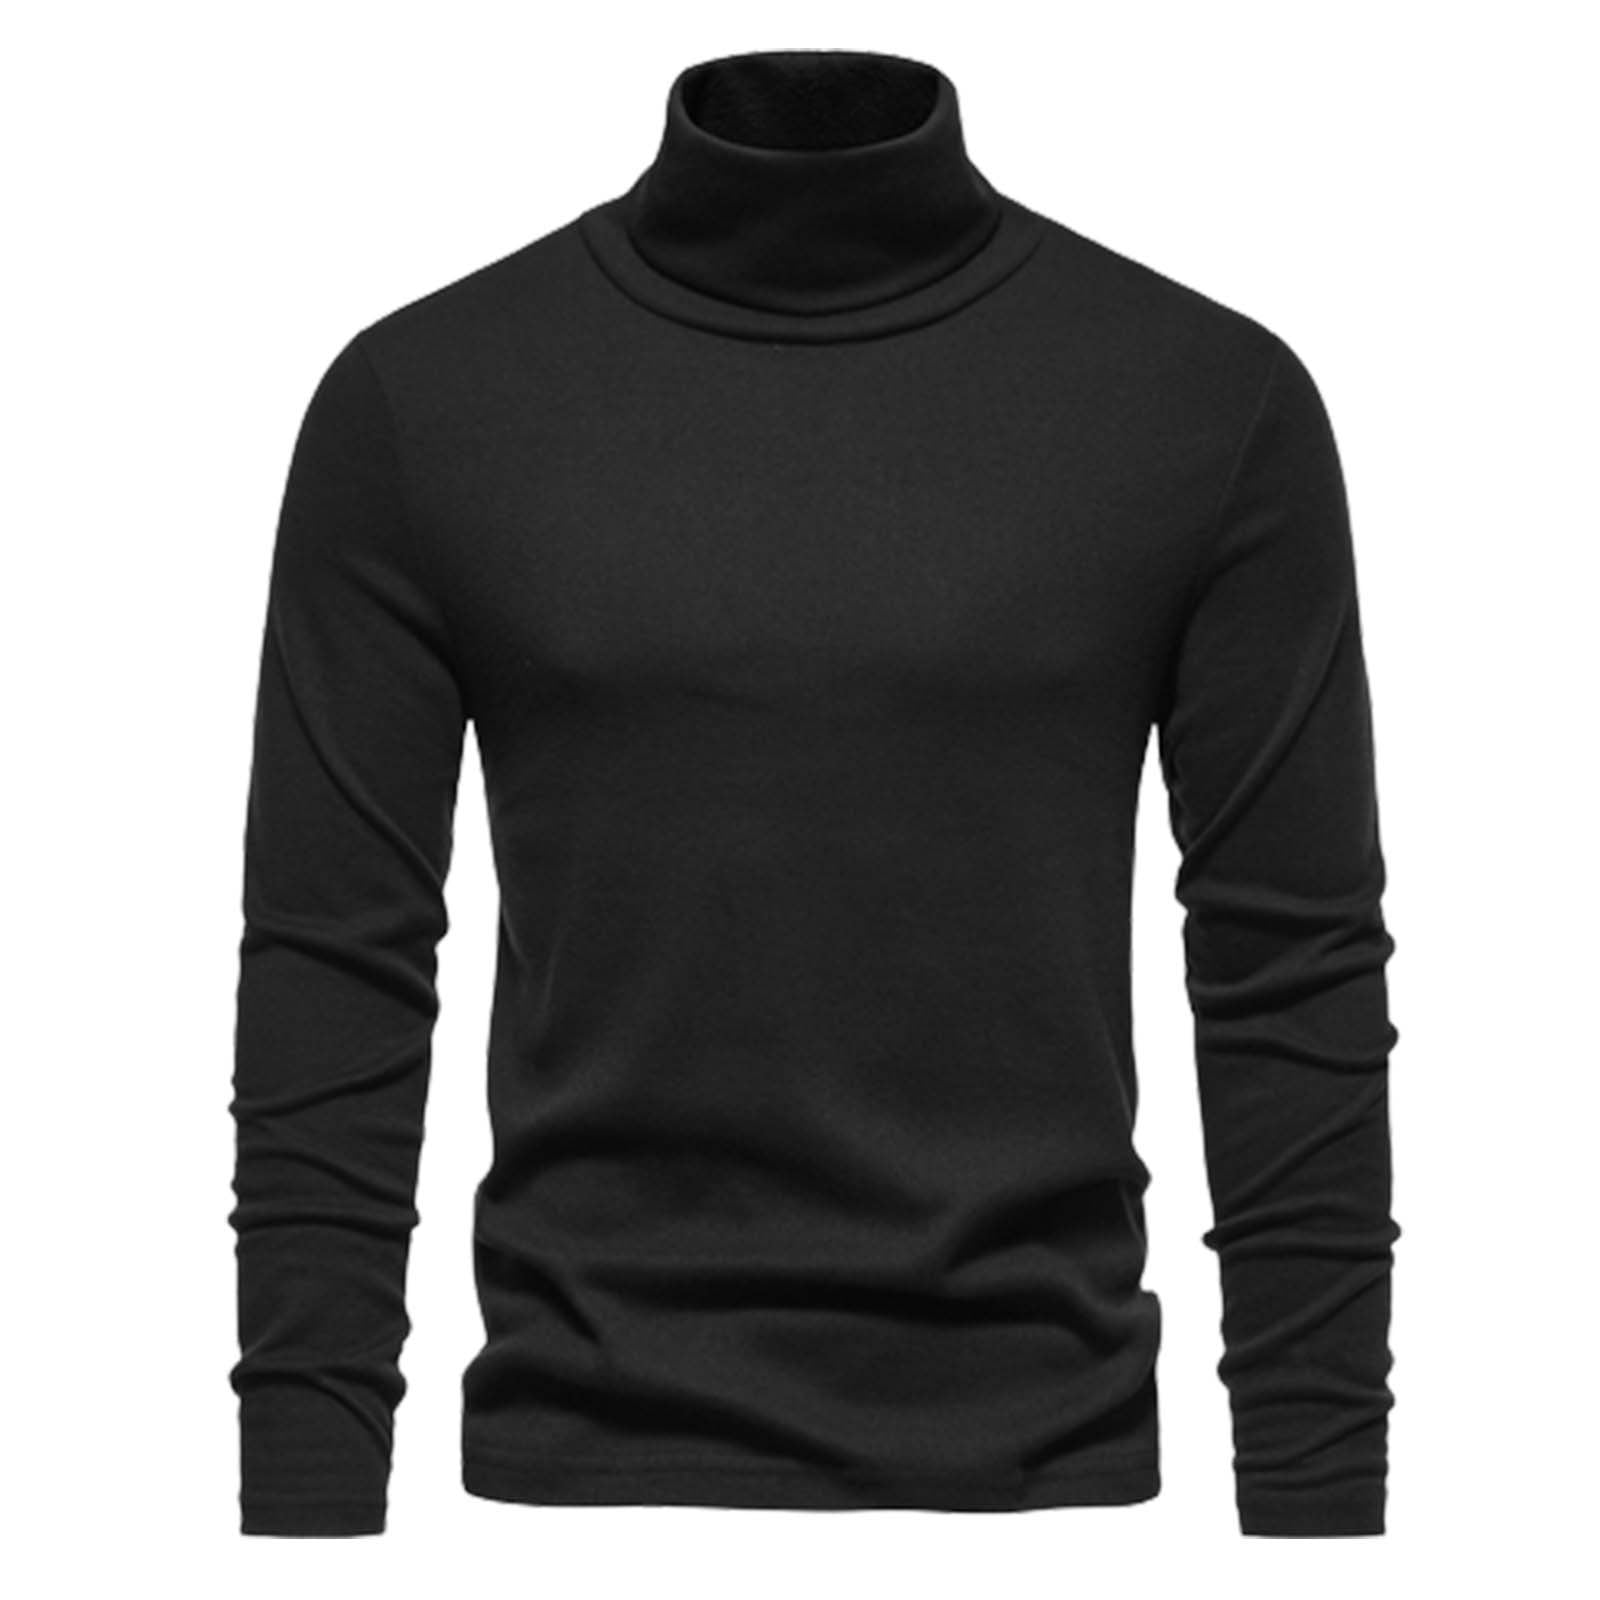 Manxivoo Mens Sweater Knit Sweater Solid Color Round Neck Long Sleeve ...